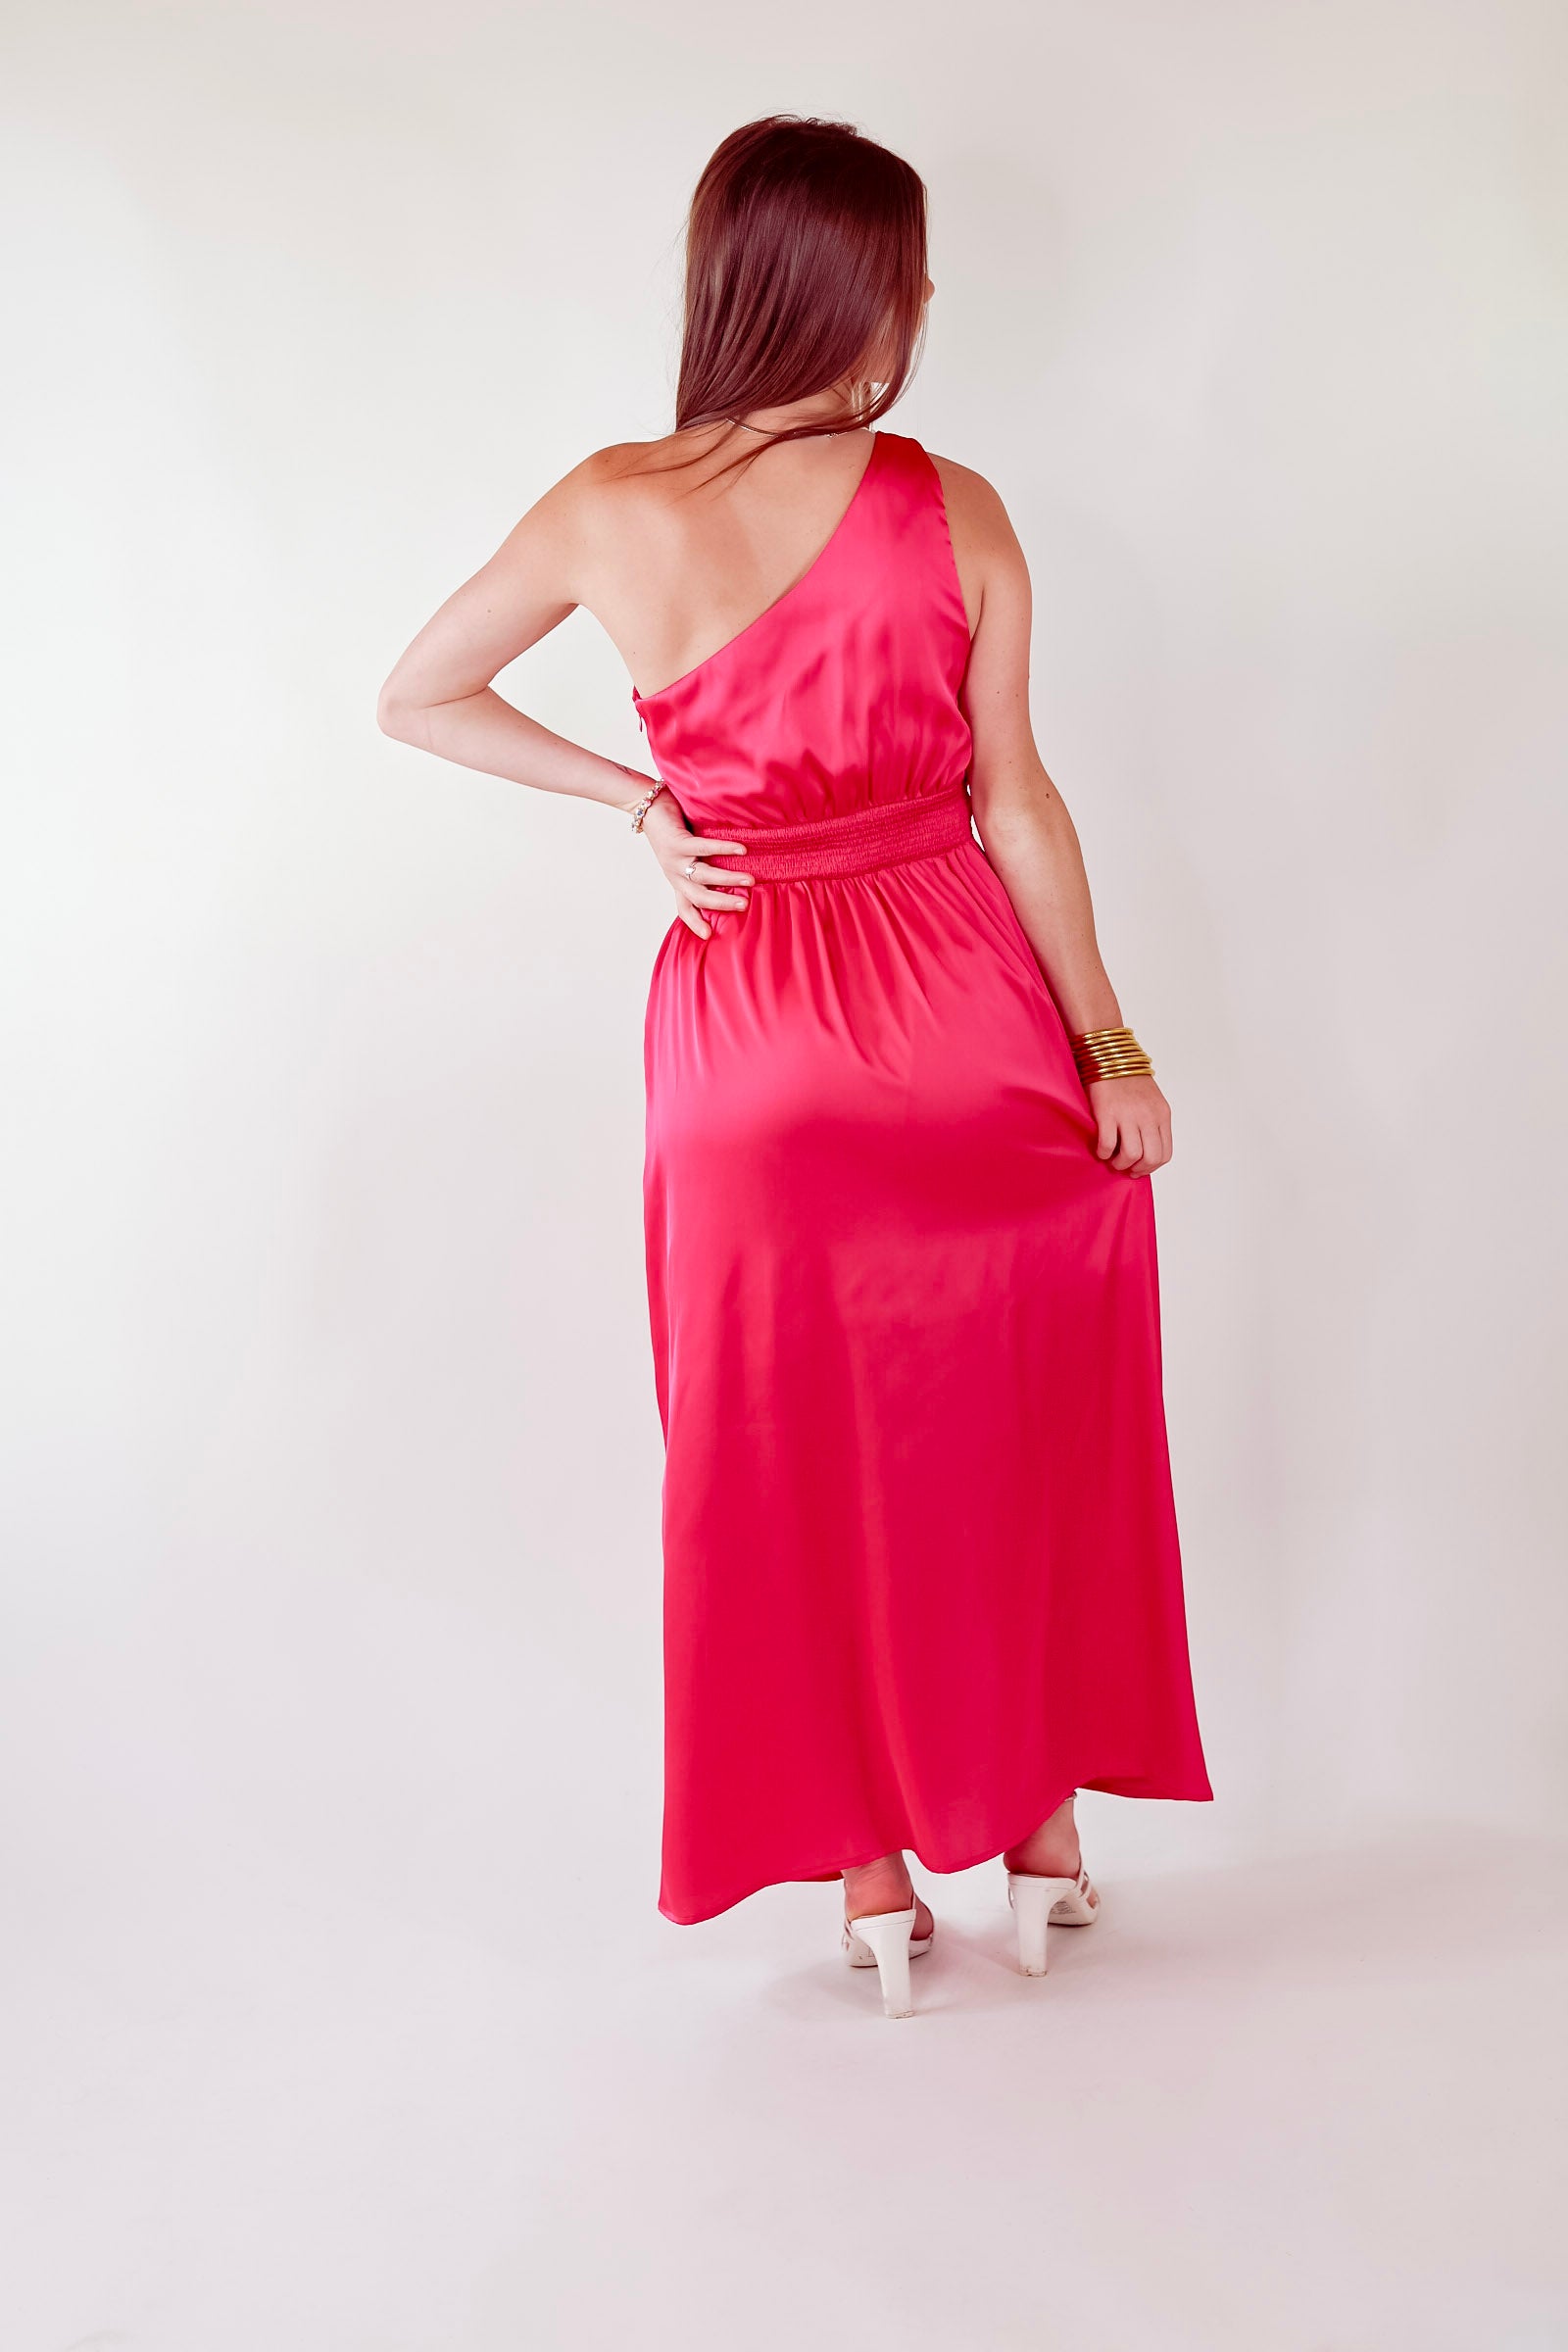 Luxury Glam One Shoulder Slit Dress in Fuschia Pink - Giddy Up Glamour Boutique